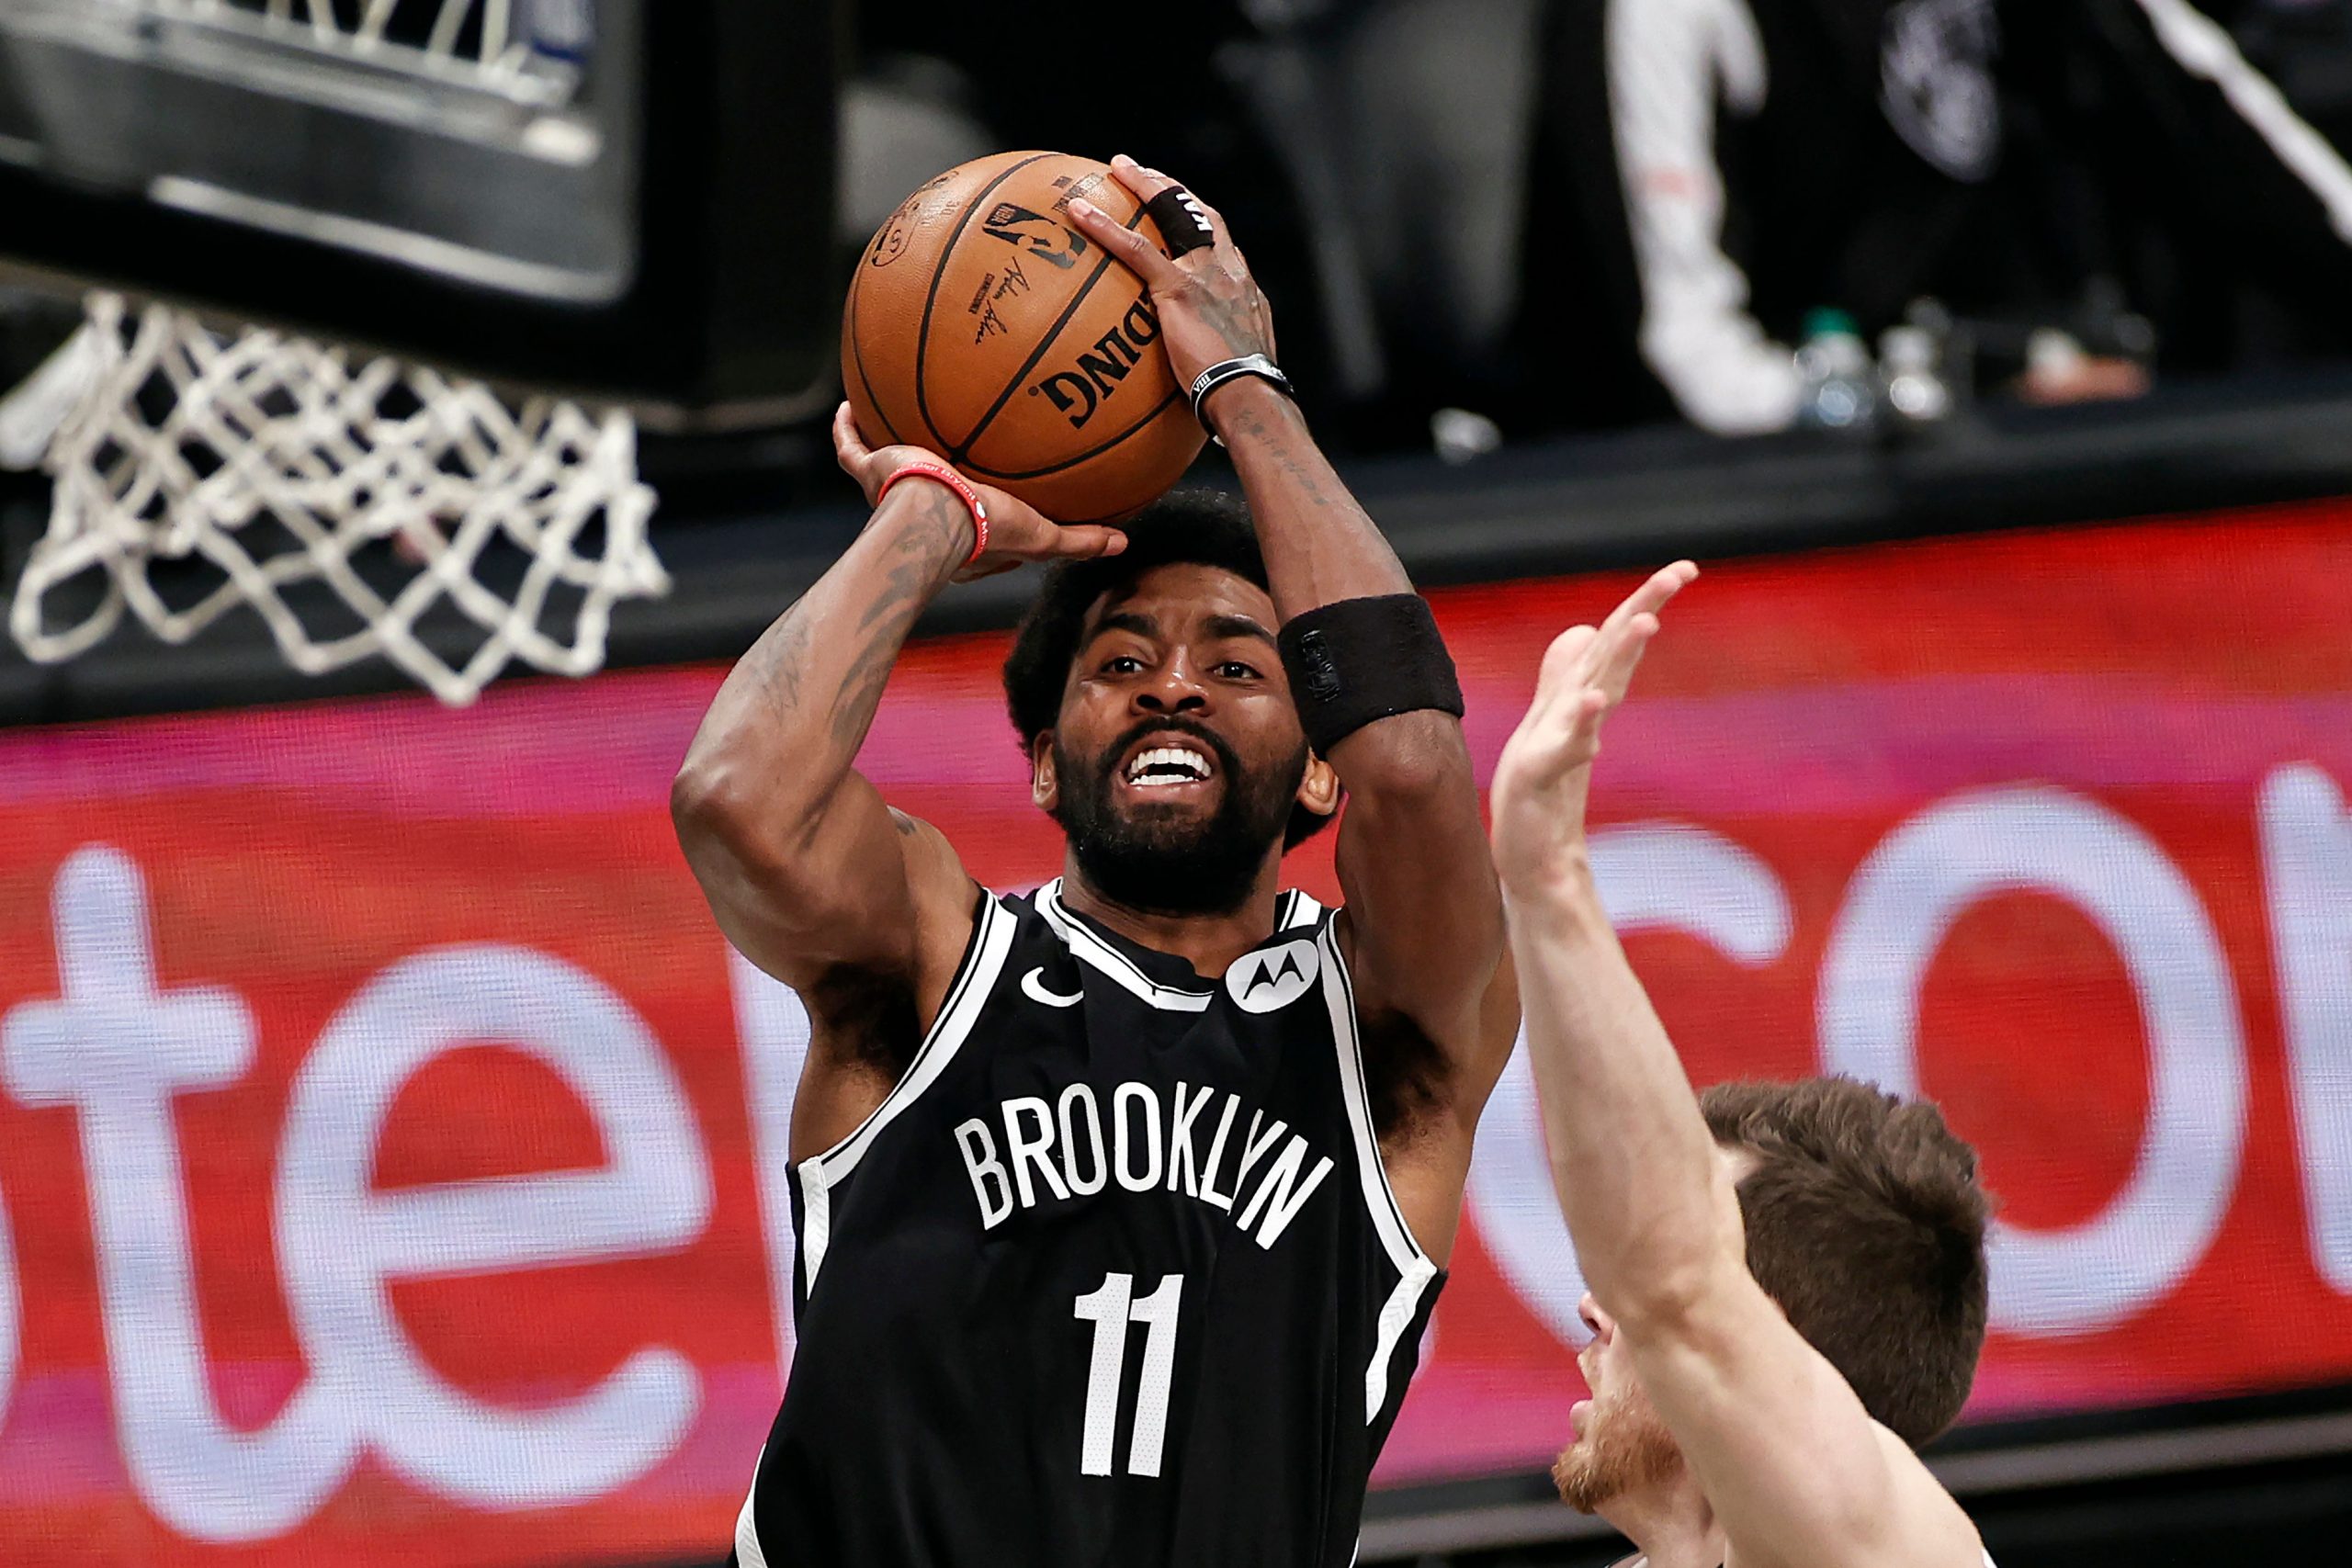 NBA star Kyrie Irving can practice with Brooklyn Nets, won’t play in home games: Reports